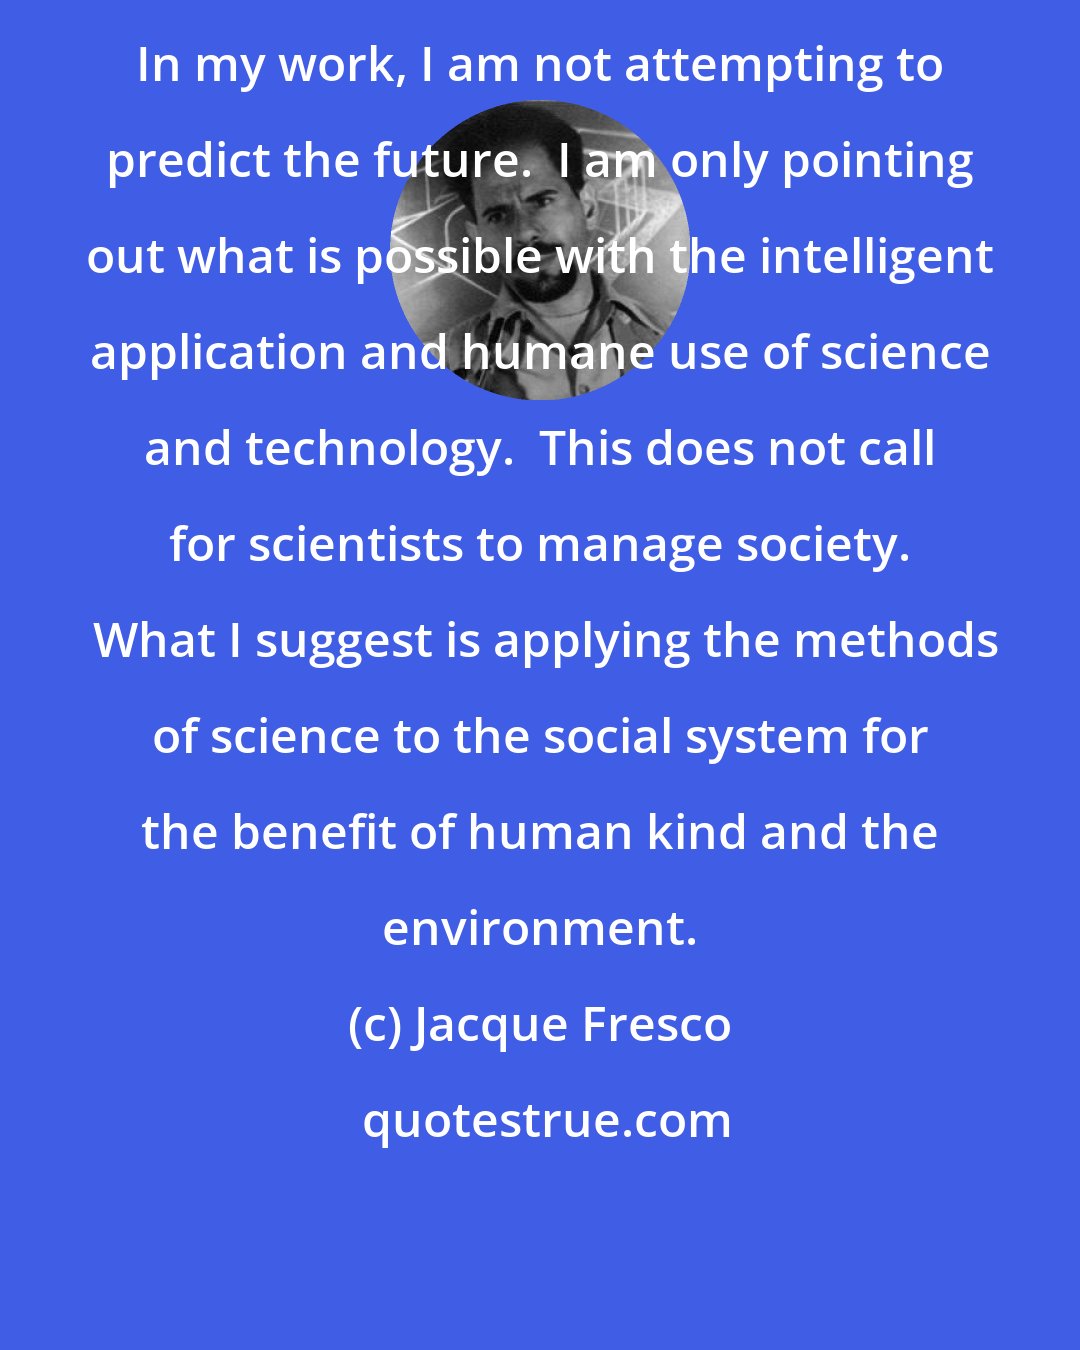 Jacque Fresco: In my work, I am not attempting to predict the future.  I am only pointing out what is possible with the intelligent application and humane use of science and technology.  This does not call for scientists to manage society.  What I suggest is applying the methods of science to the social system for the benefit of human kind and the environment.